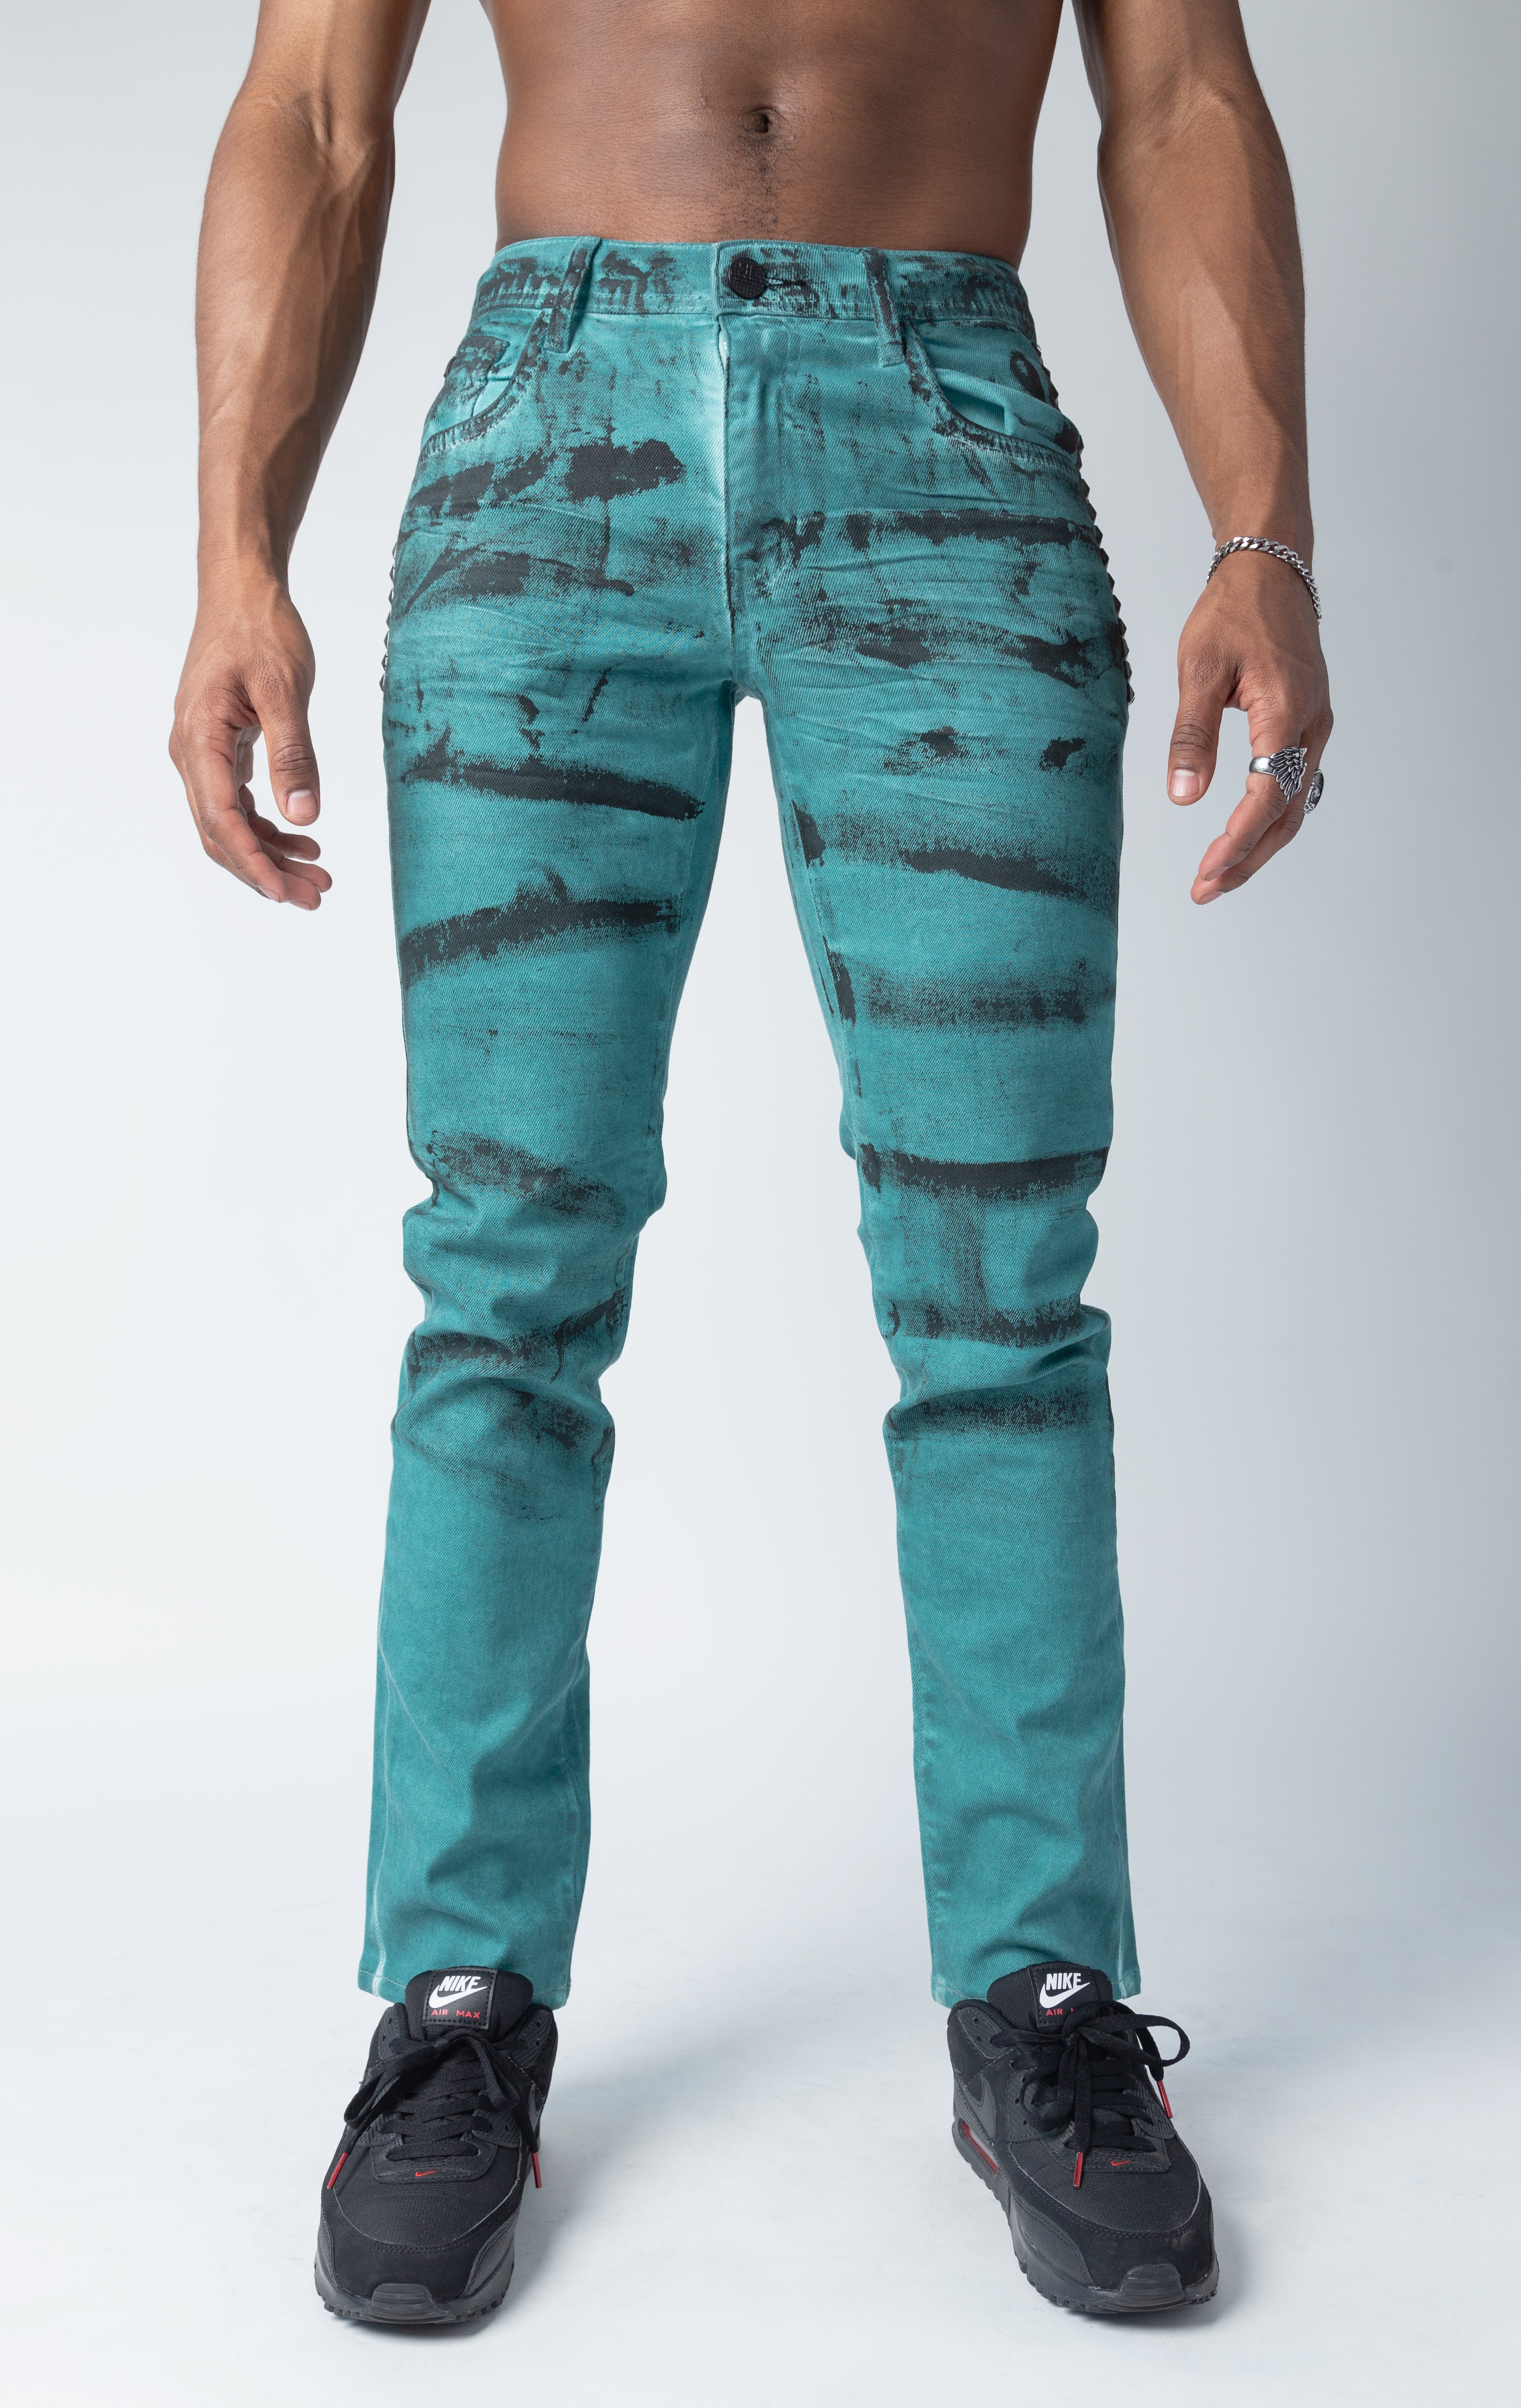 Jade color pants with distressed style 